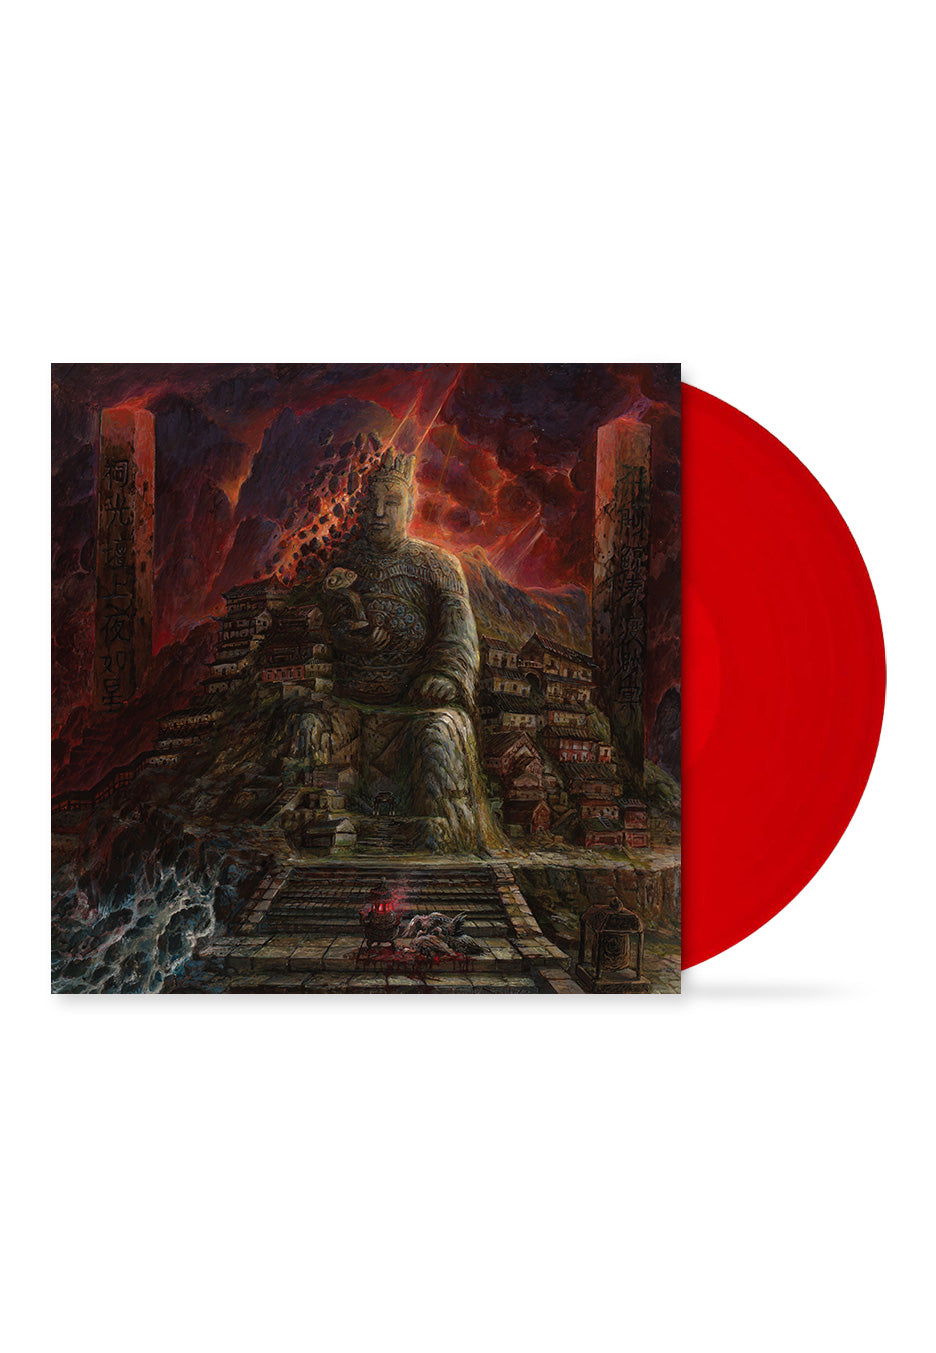 Ripped To Shreds - 劇變 (Jubian) Blood Red - Colored Vinyl